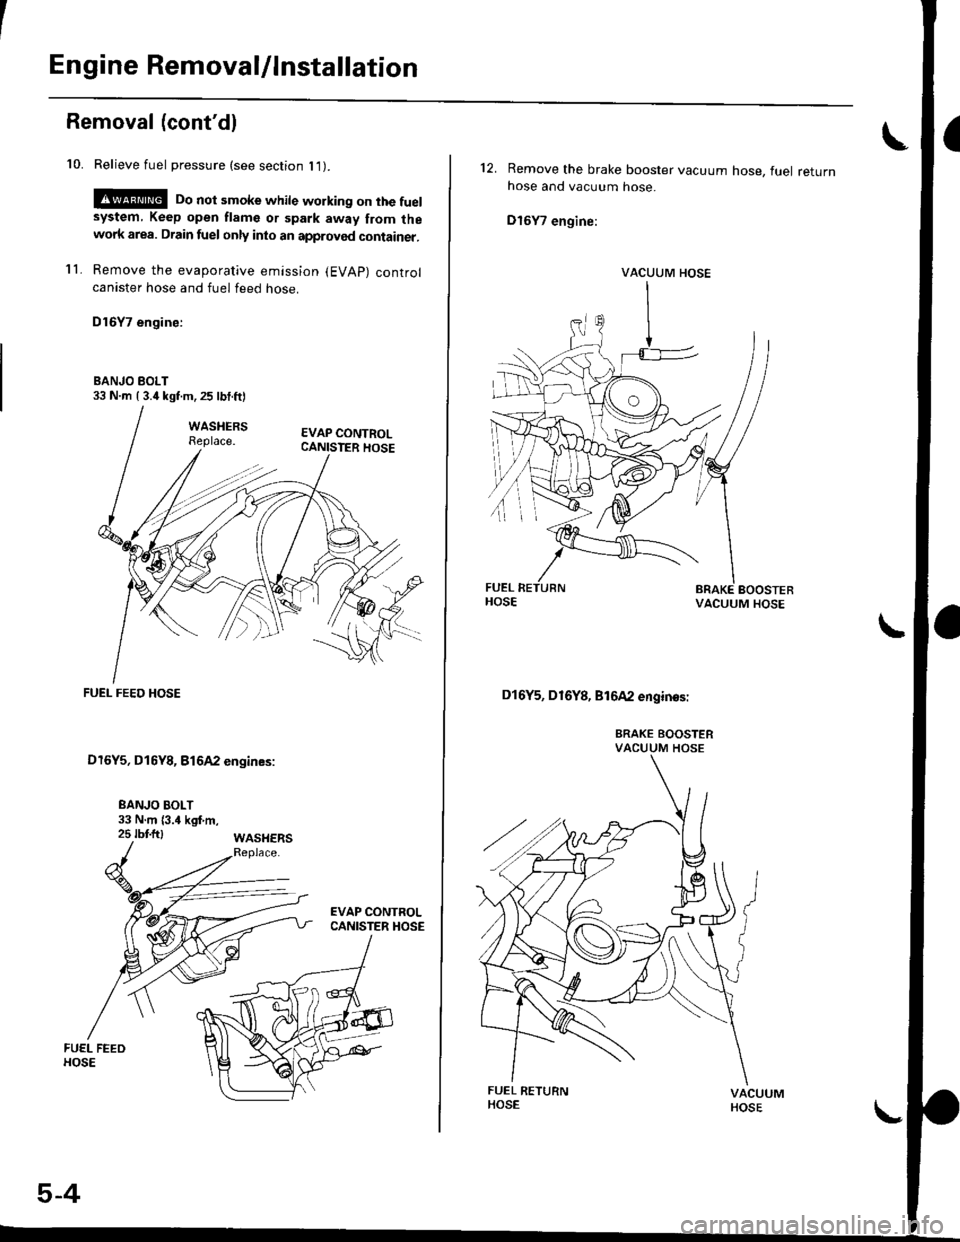 HONDA CIVIC 1996 6.G Owners Manual Engine Removal/lnstallation
Removal (contdl
10. Relieve fuel pressure (see section l1).
!@ Do not smoke while working on the fuelsystem, Keep open flame or spark away from thewolk area. Drain fuel on